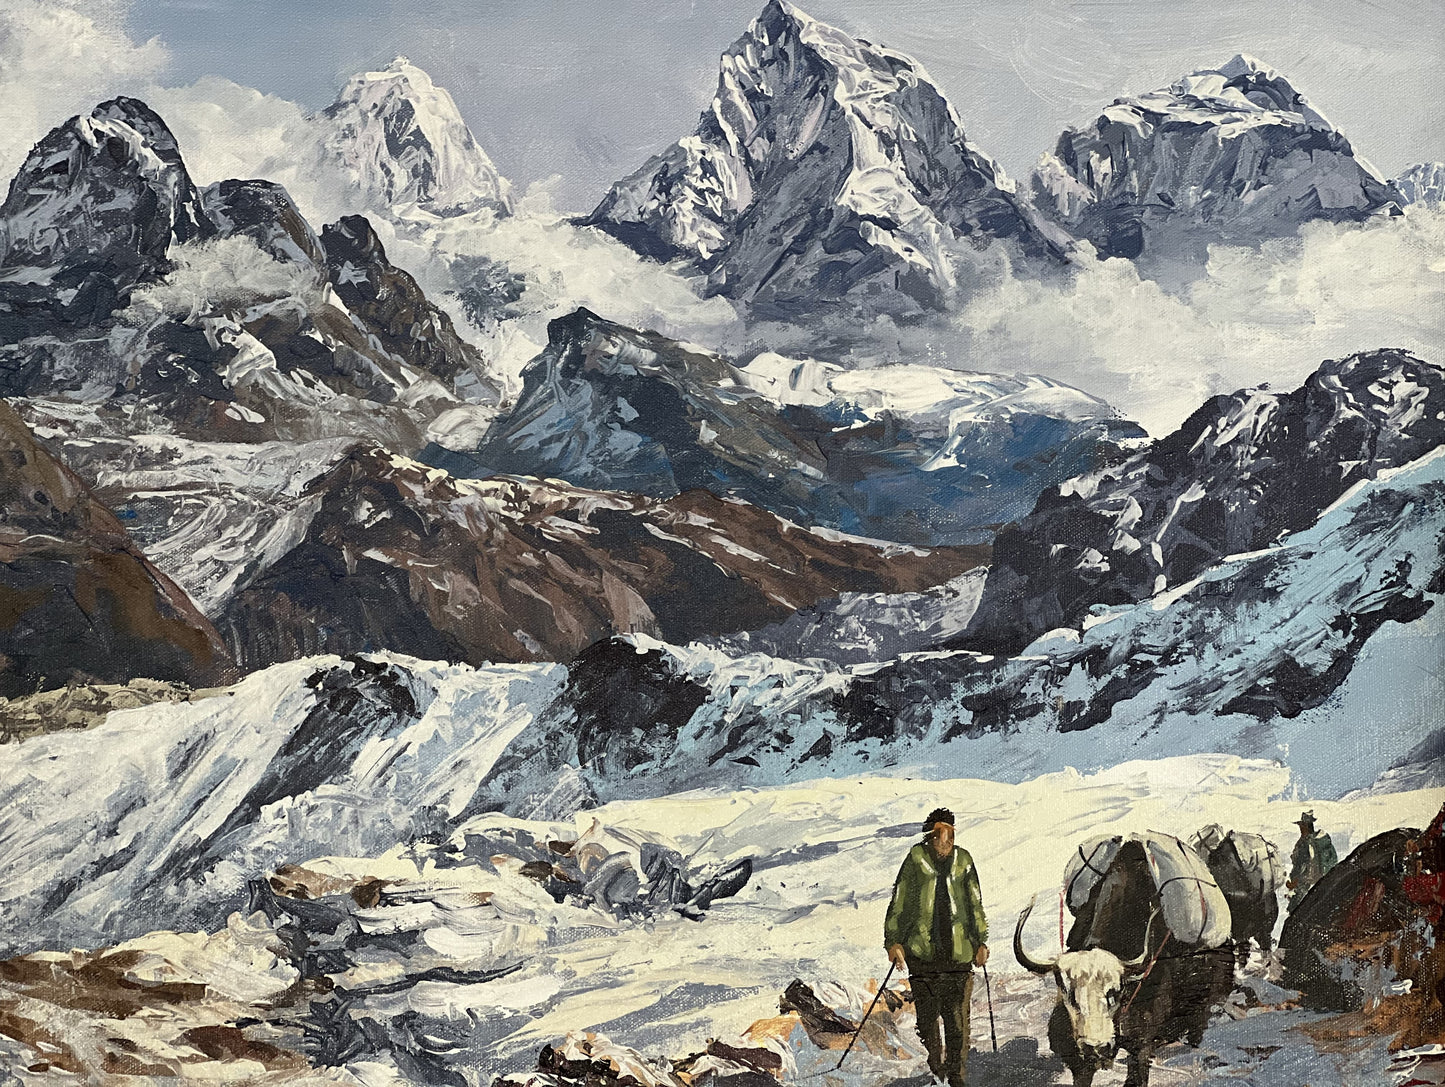 Majestic Mount Everest/ Highest Peak in the World/ Acrylic Landscape Painting On Canvas/ High Quality Palette Knife Painting